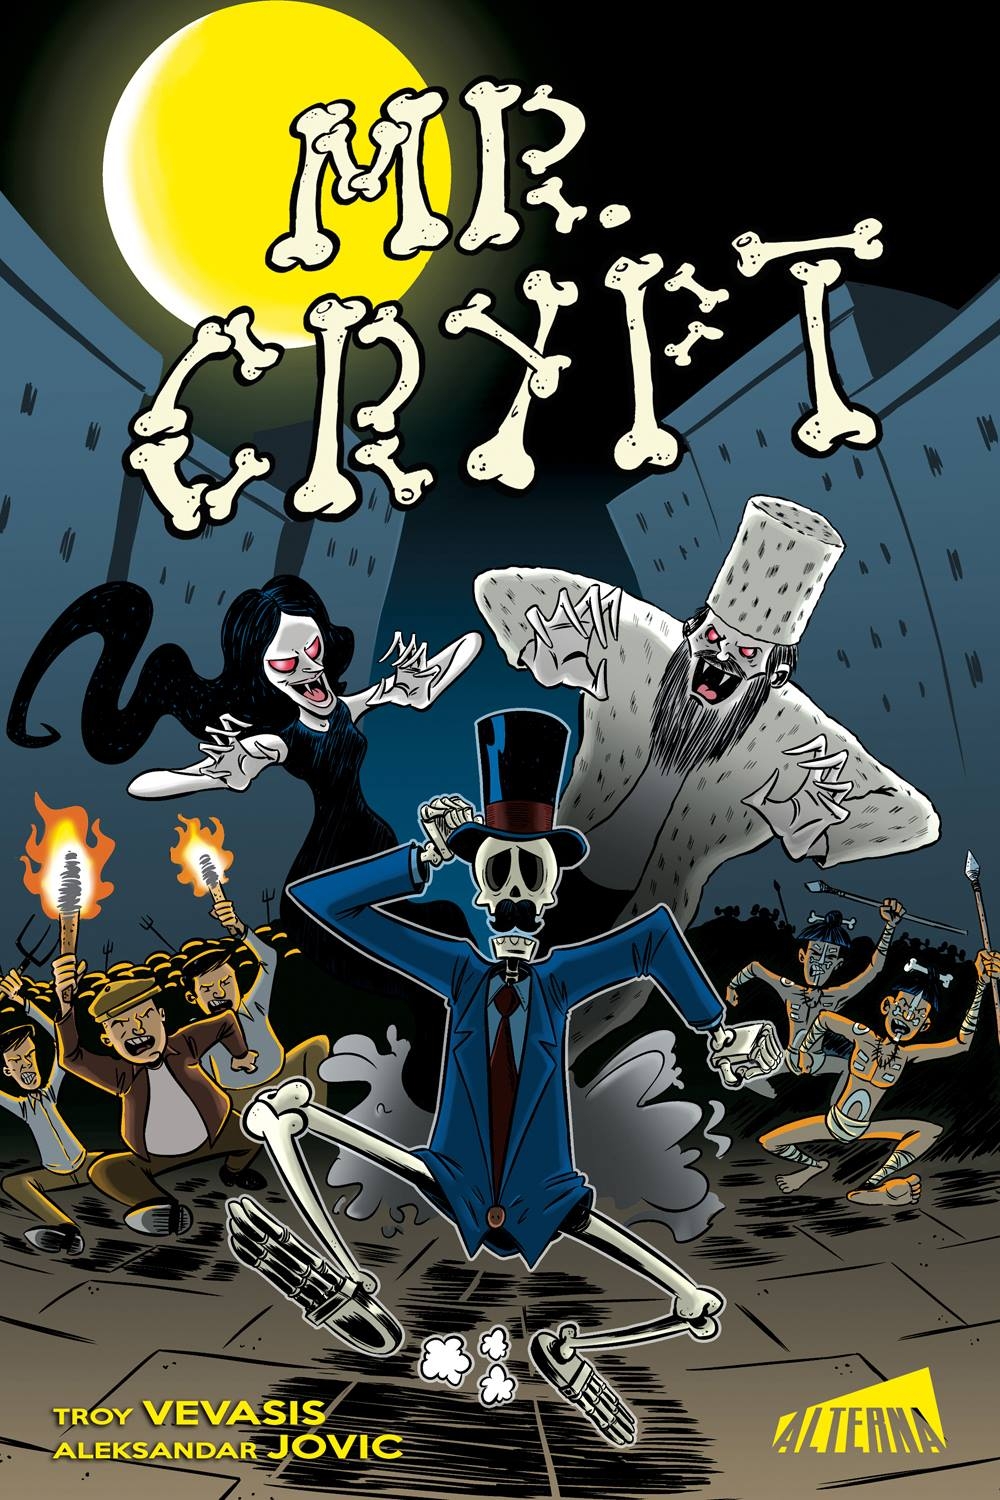 Start the New Year with Mr. Crypt!